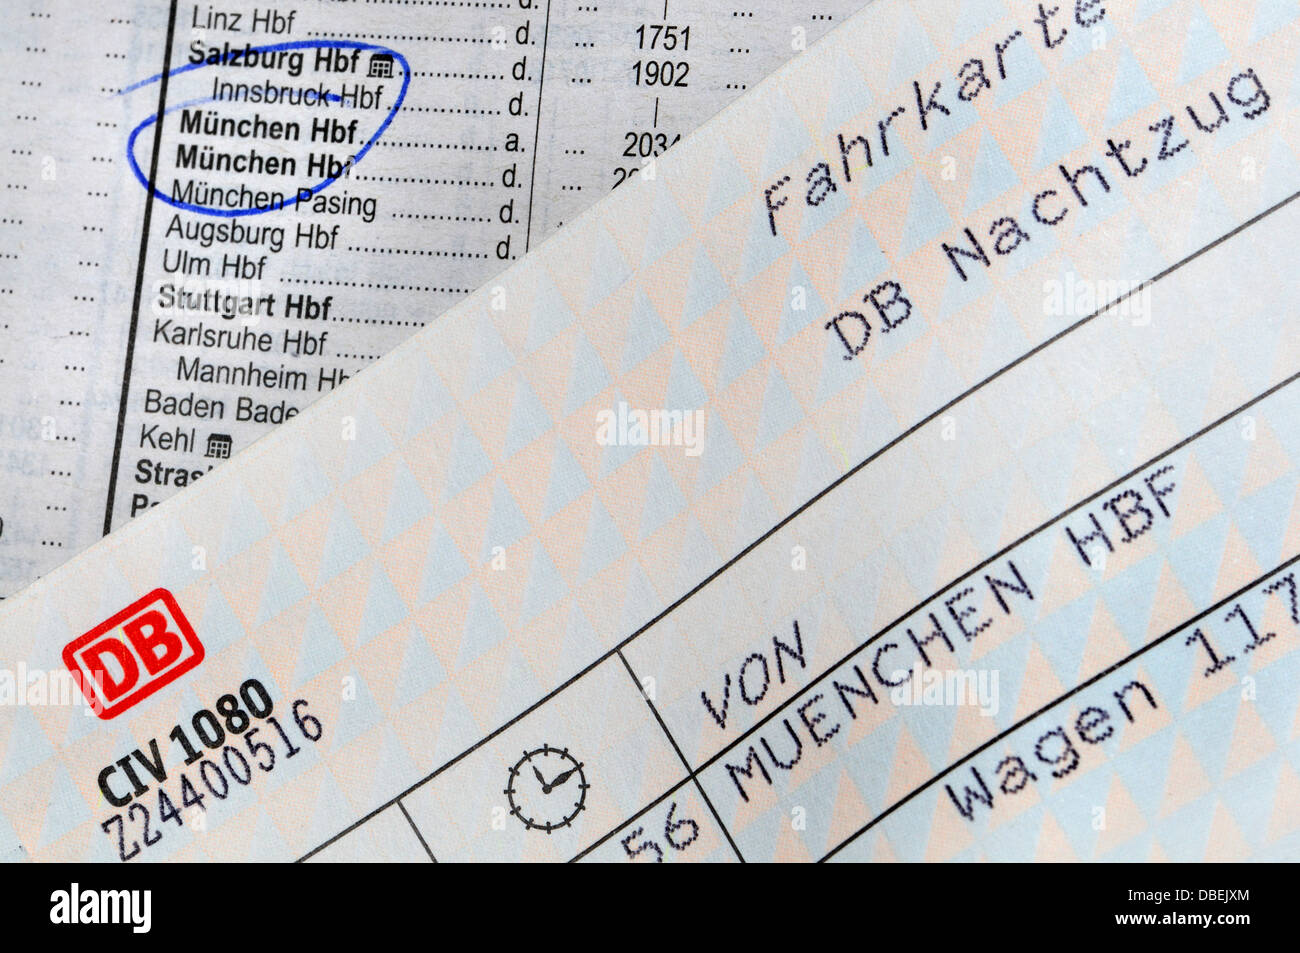 Rail Ticket and Timetable - Munich Stock Photo